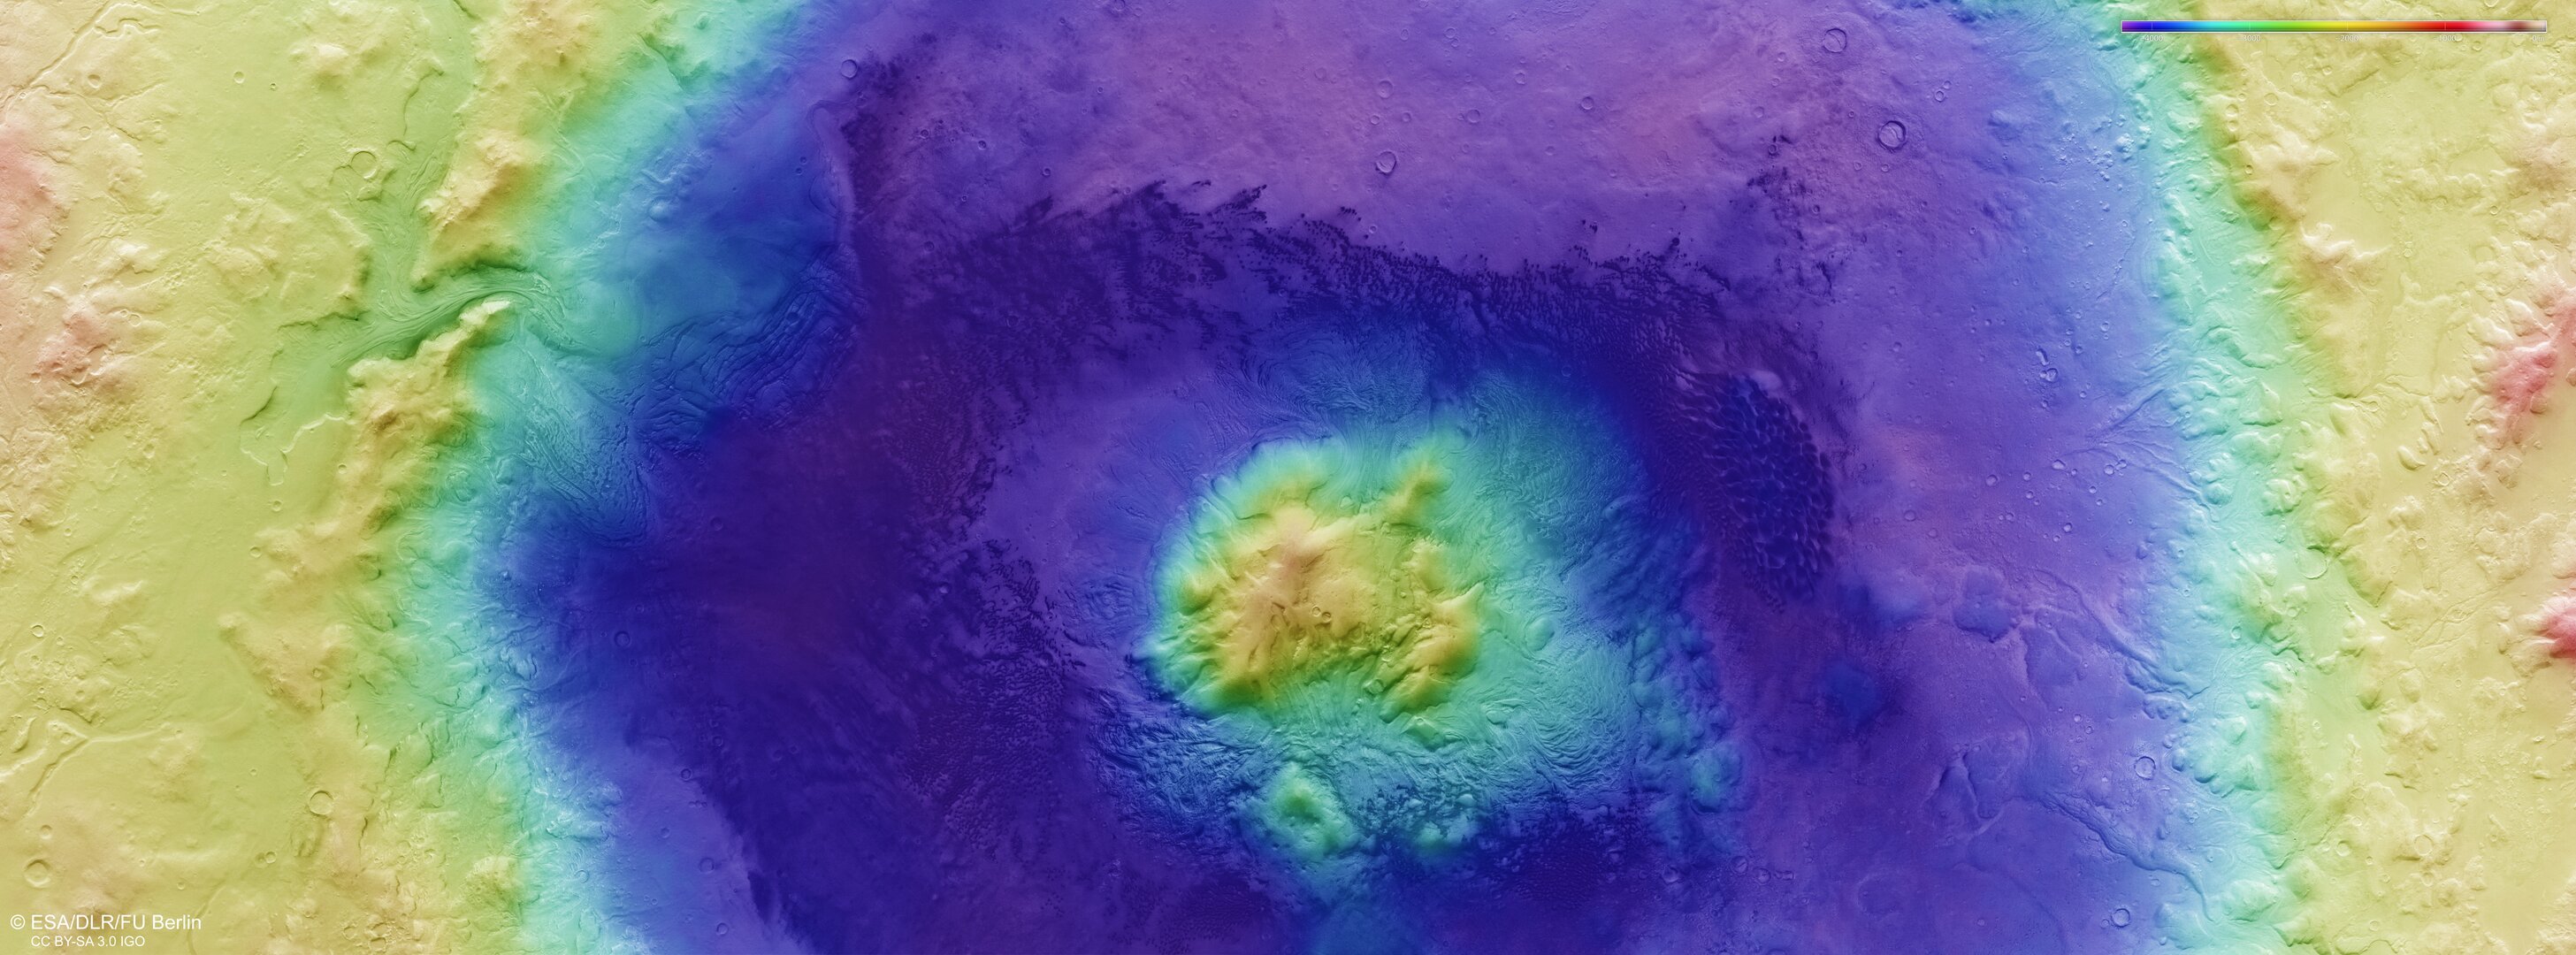 Colour-coded topographic image of Moreux crater